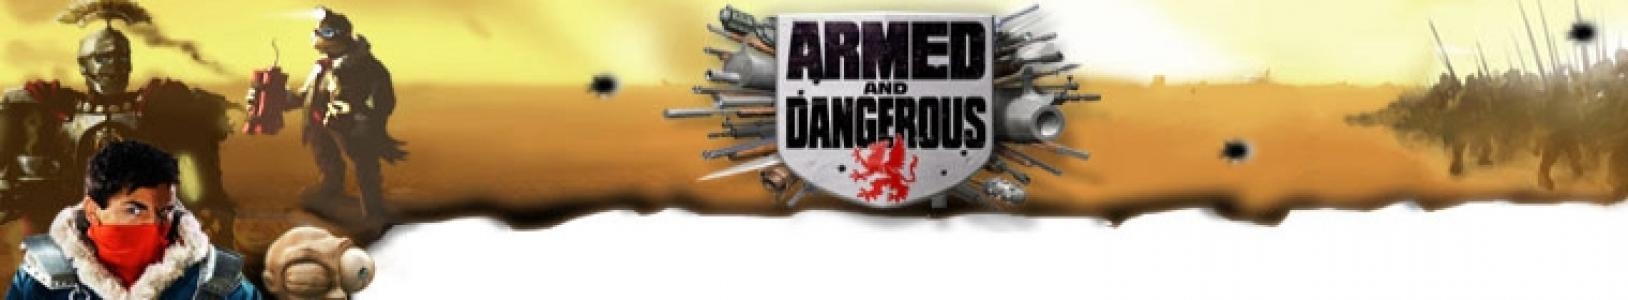 Armed and Dangerous banner